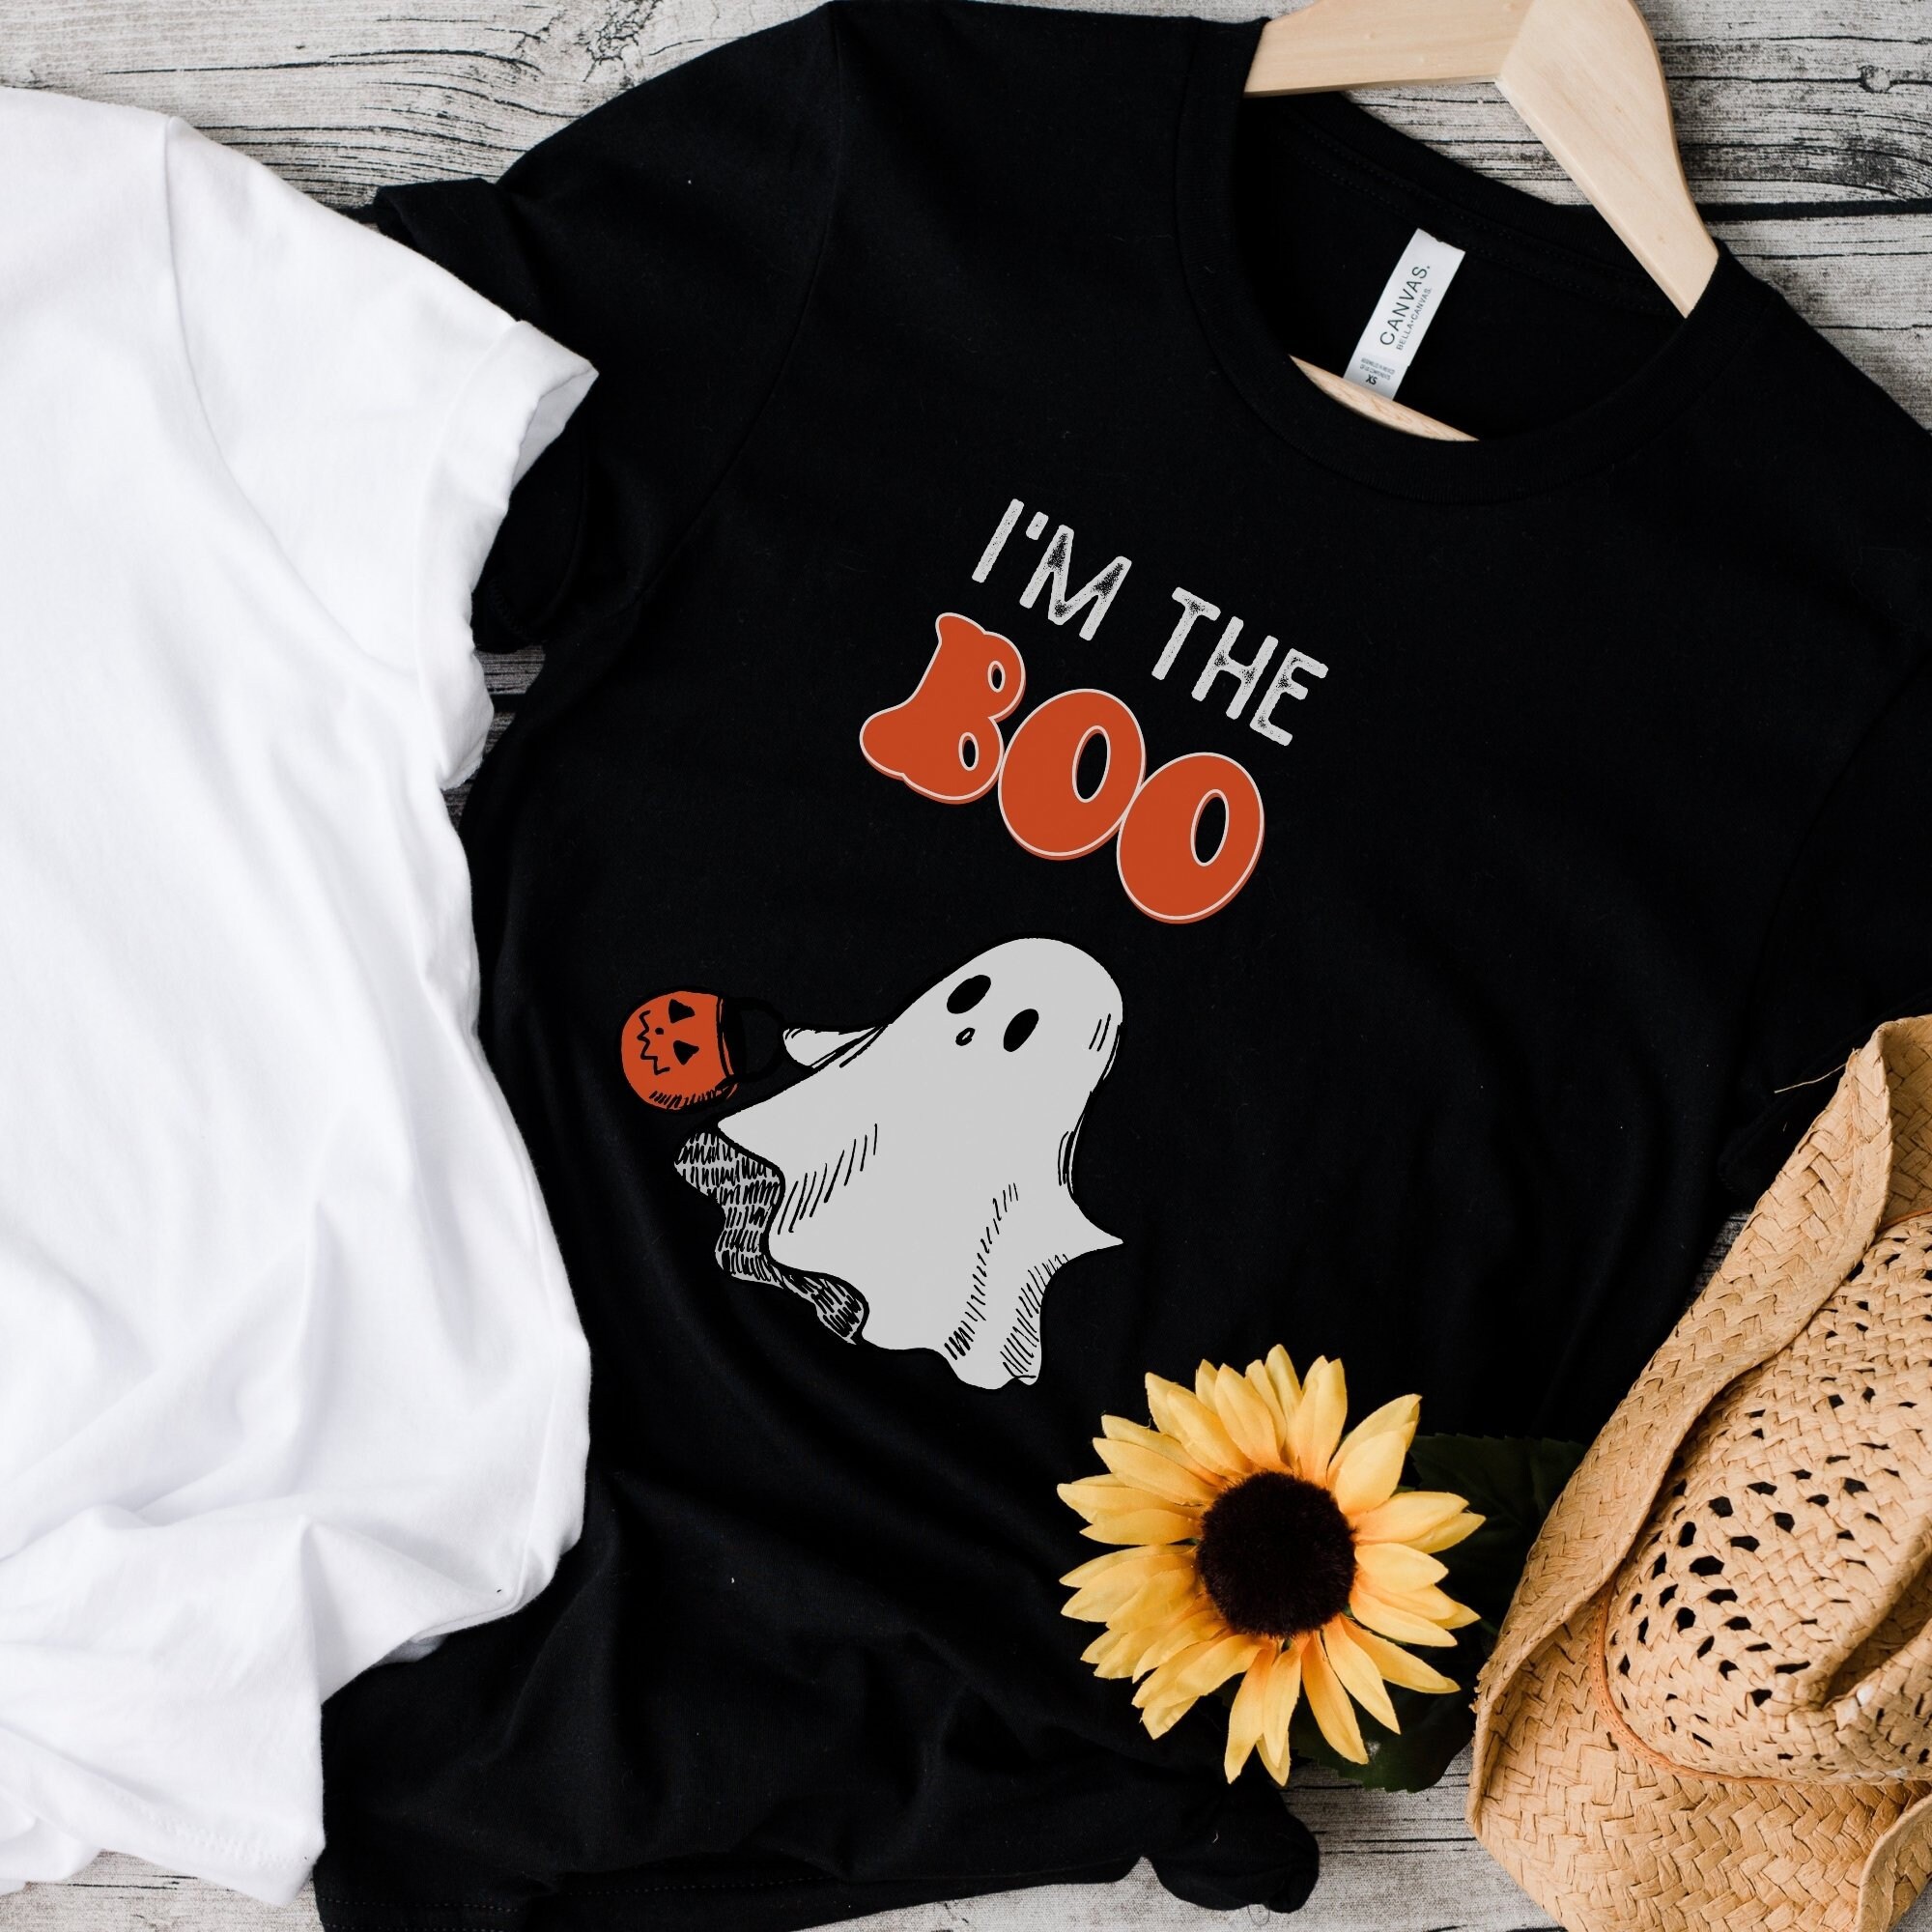 Discover I'm with the boo, Matching couple Halloween t-shirts, Halloween costume for couples,Skeleton, Ghost girl, ghost boy, Lazy Halloween costume